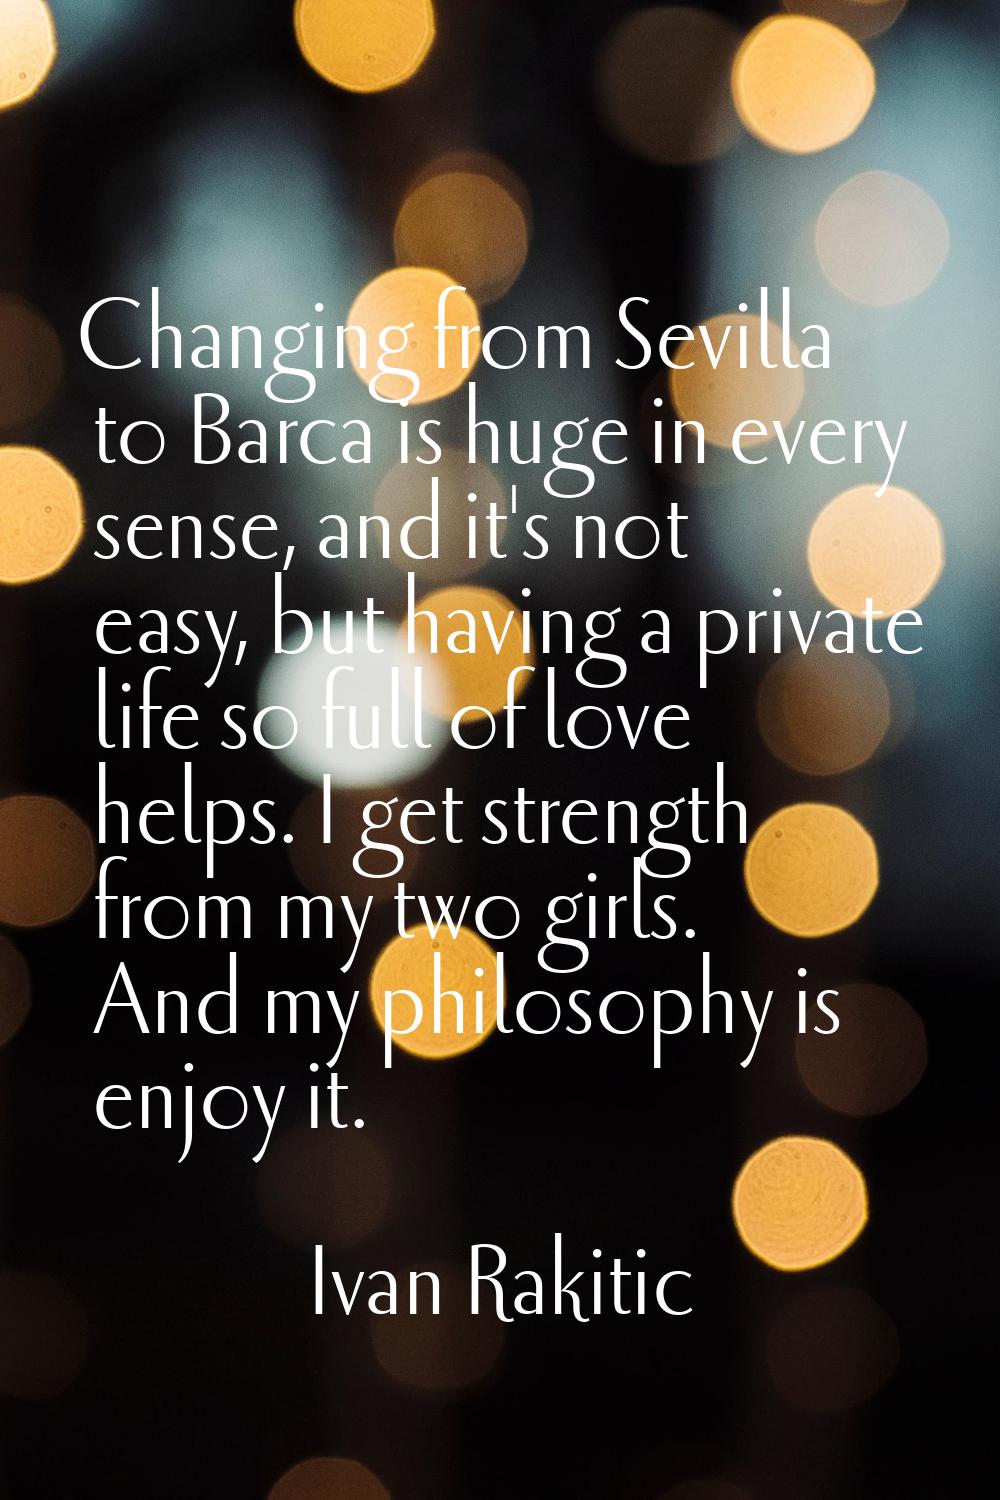 Changing from Sevilla to Barca is huge in every sense, and it's not easy, but having a private life